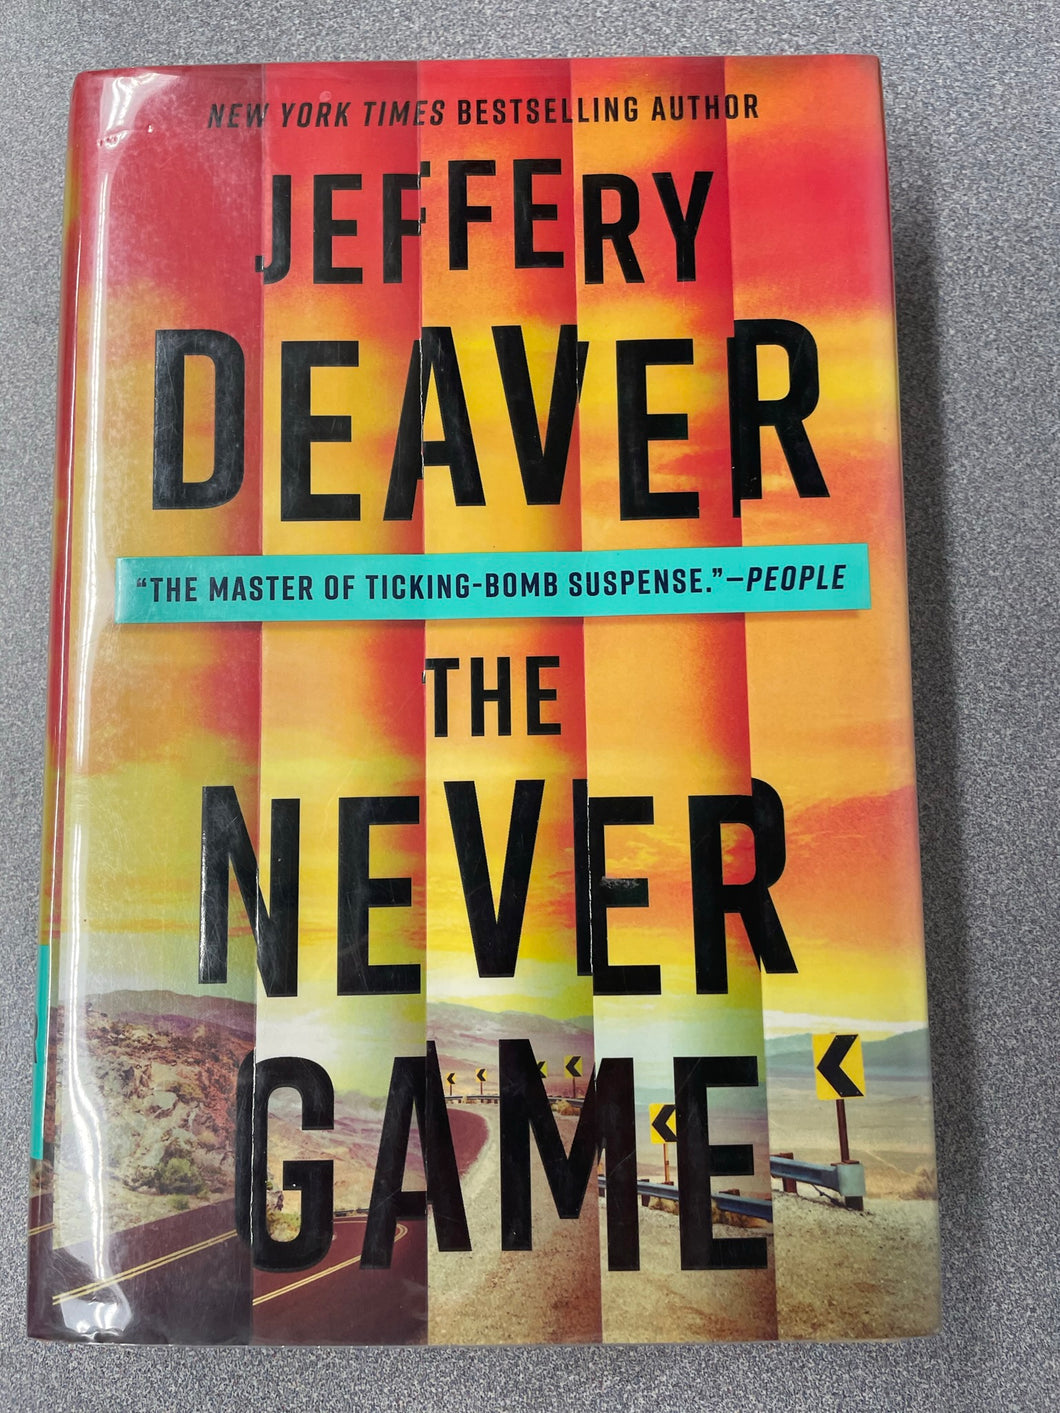 Deaver, Jeffery, The Never Game [2019] MY 6/23